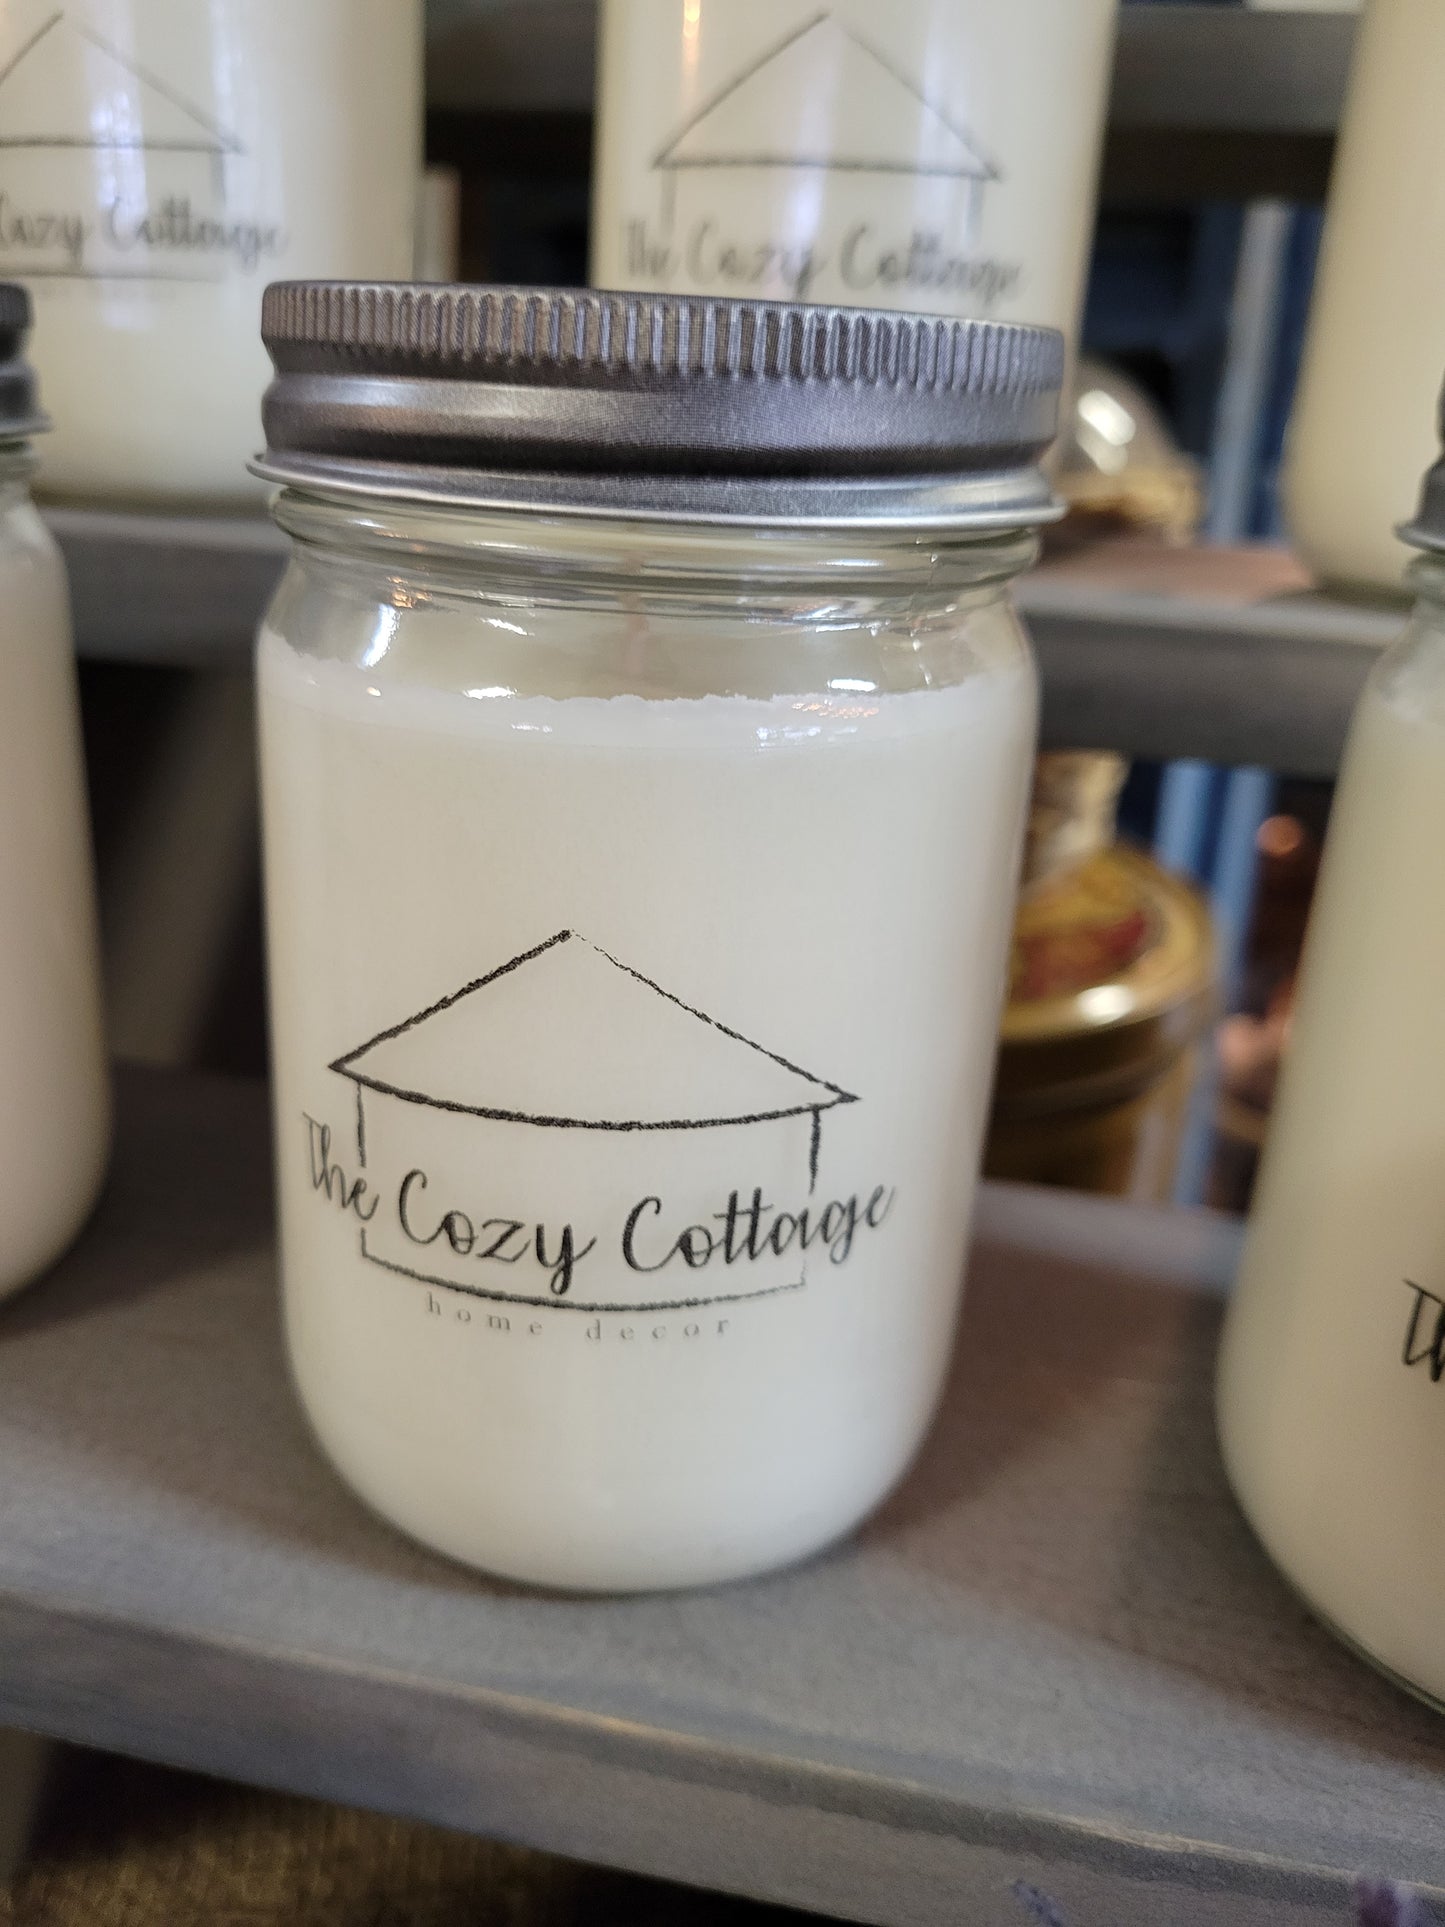 The Cozy Cottage Candle